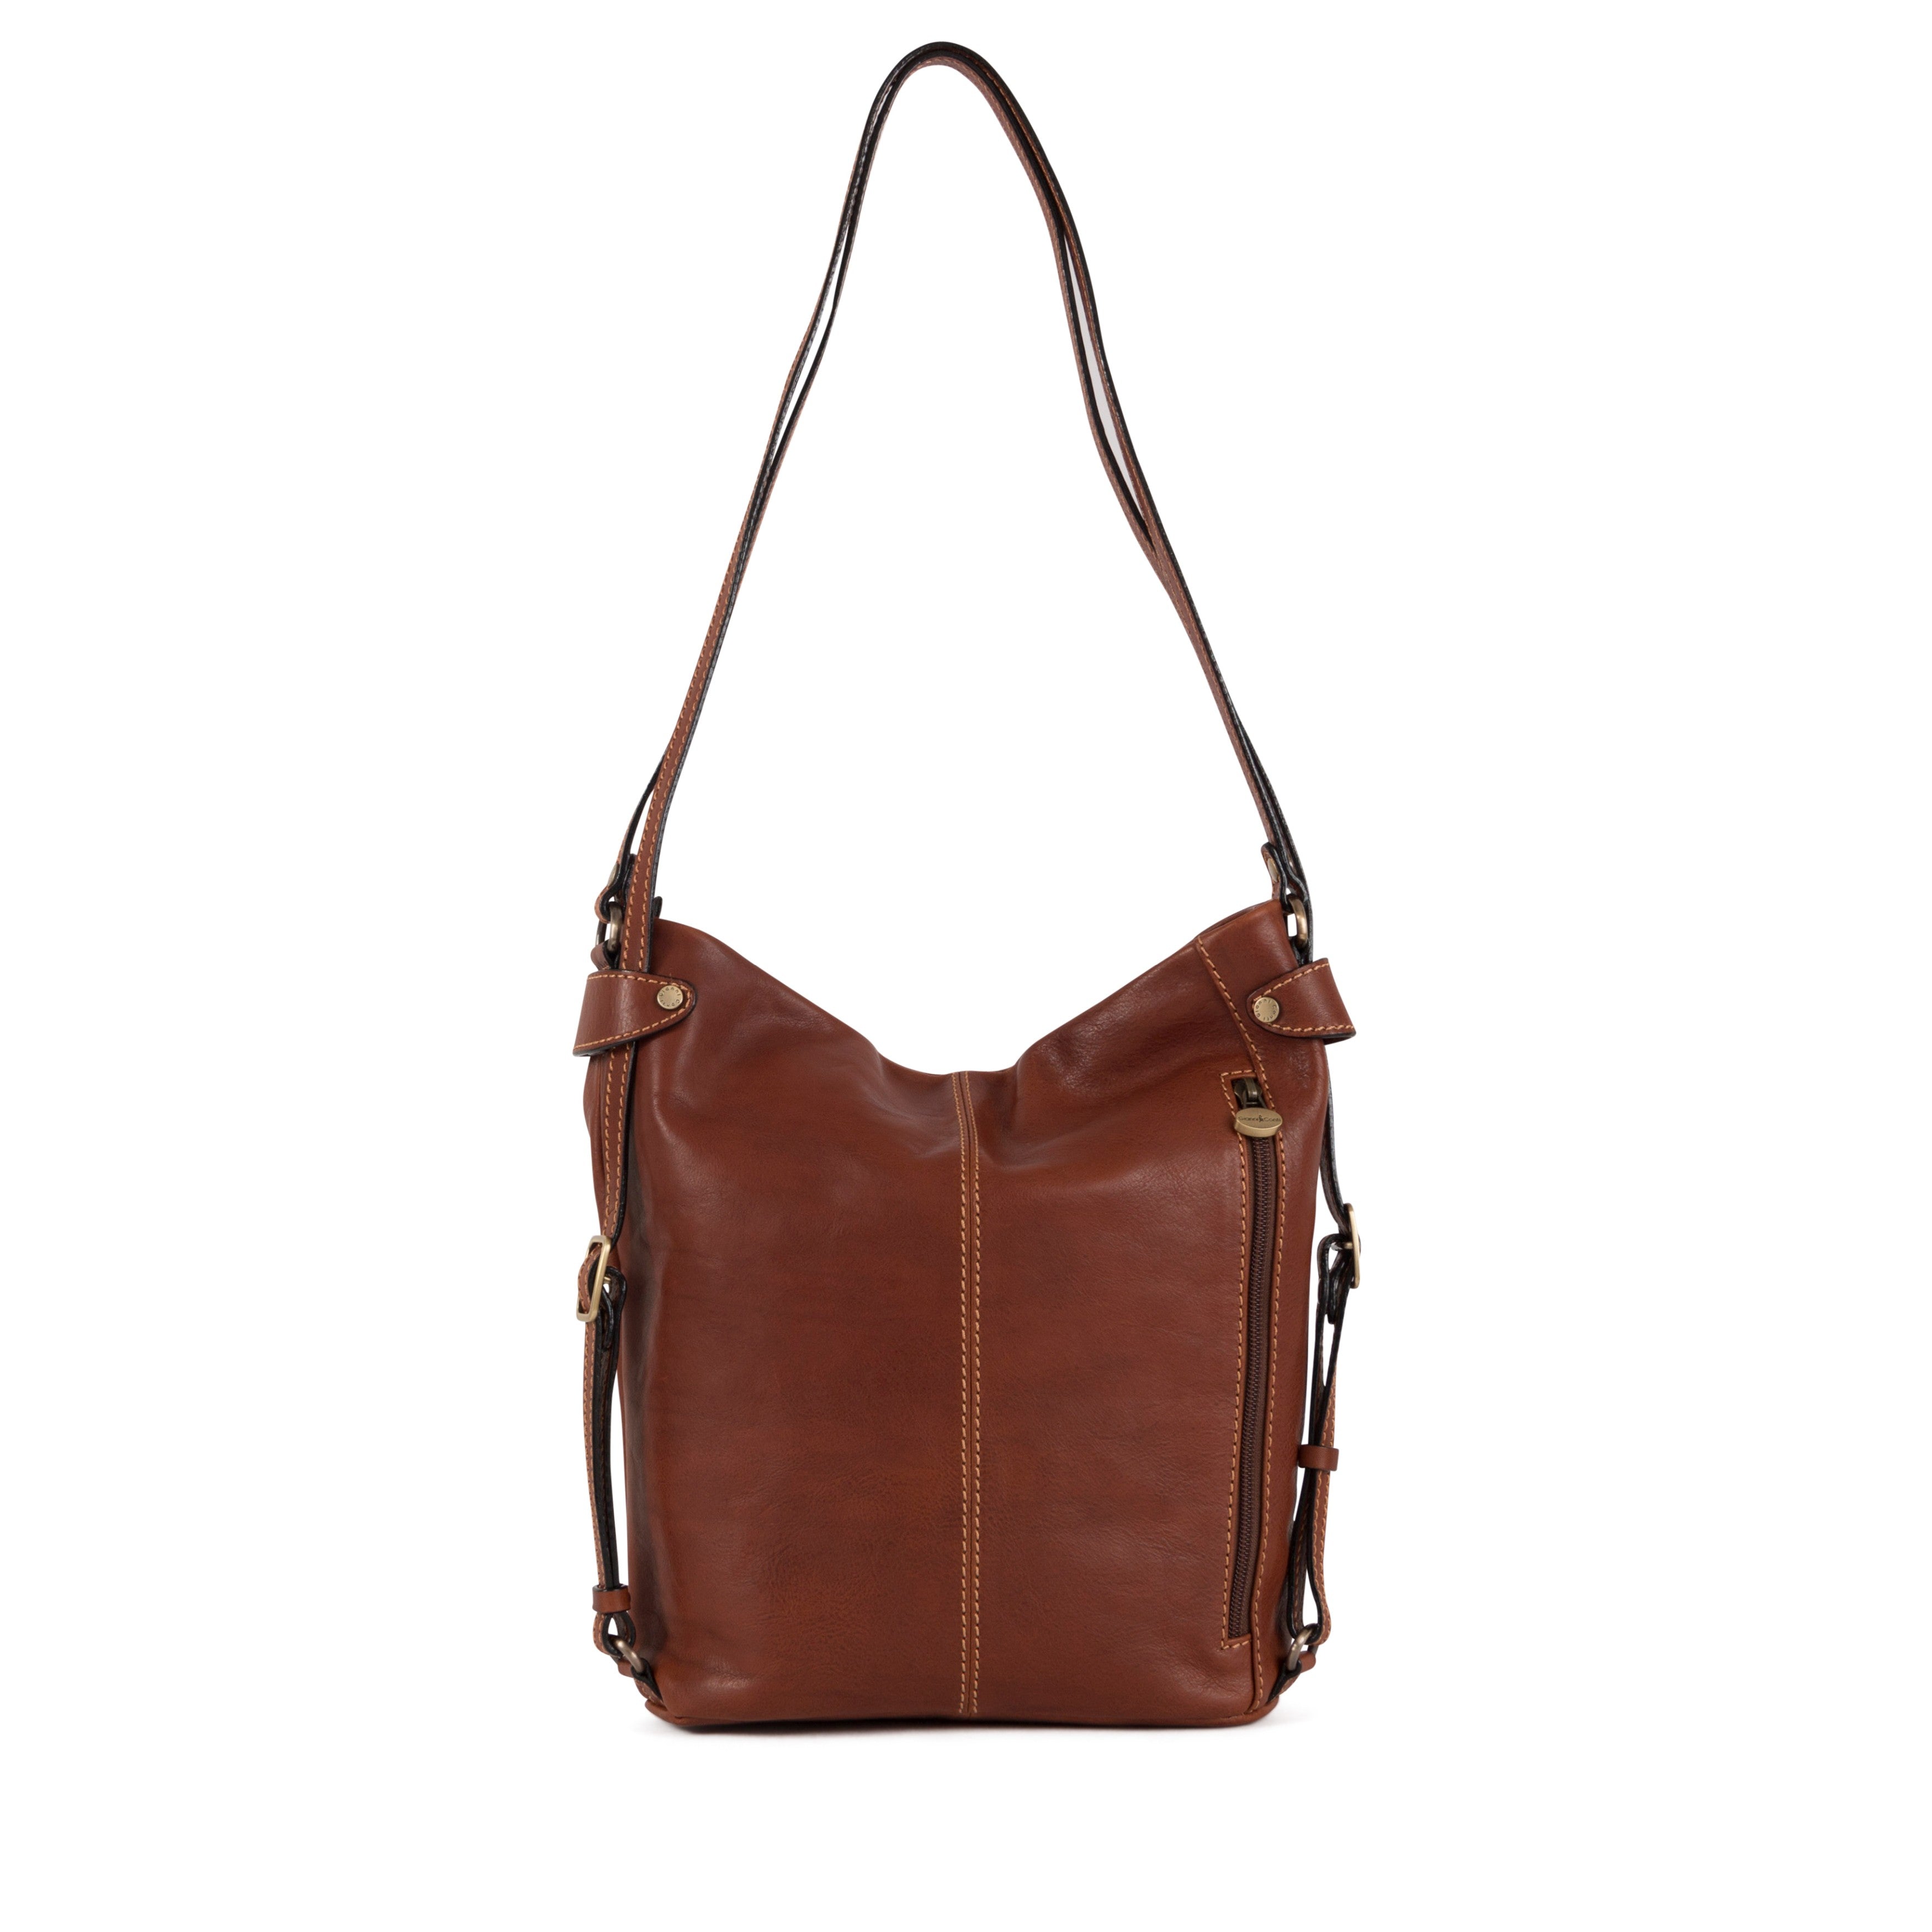 FLAVIA Convertible Leather Shoulder Bag by Gianni Conti